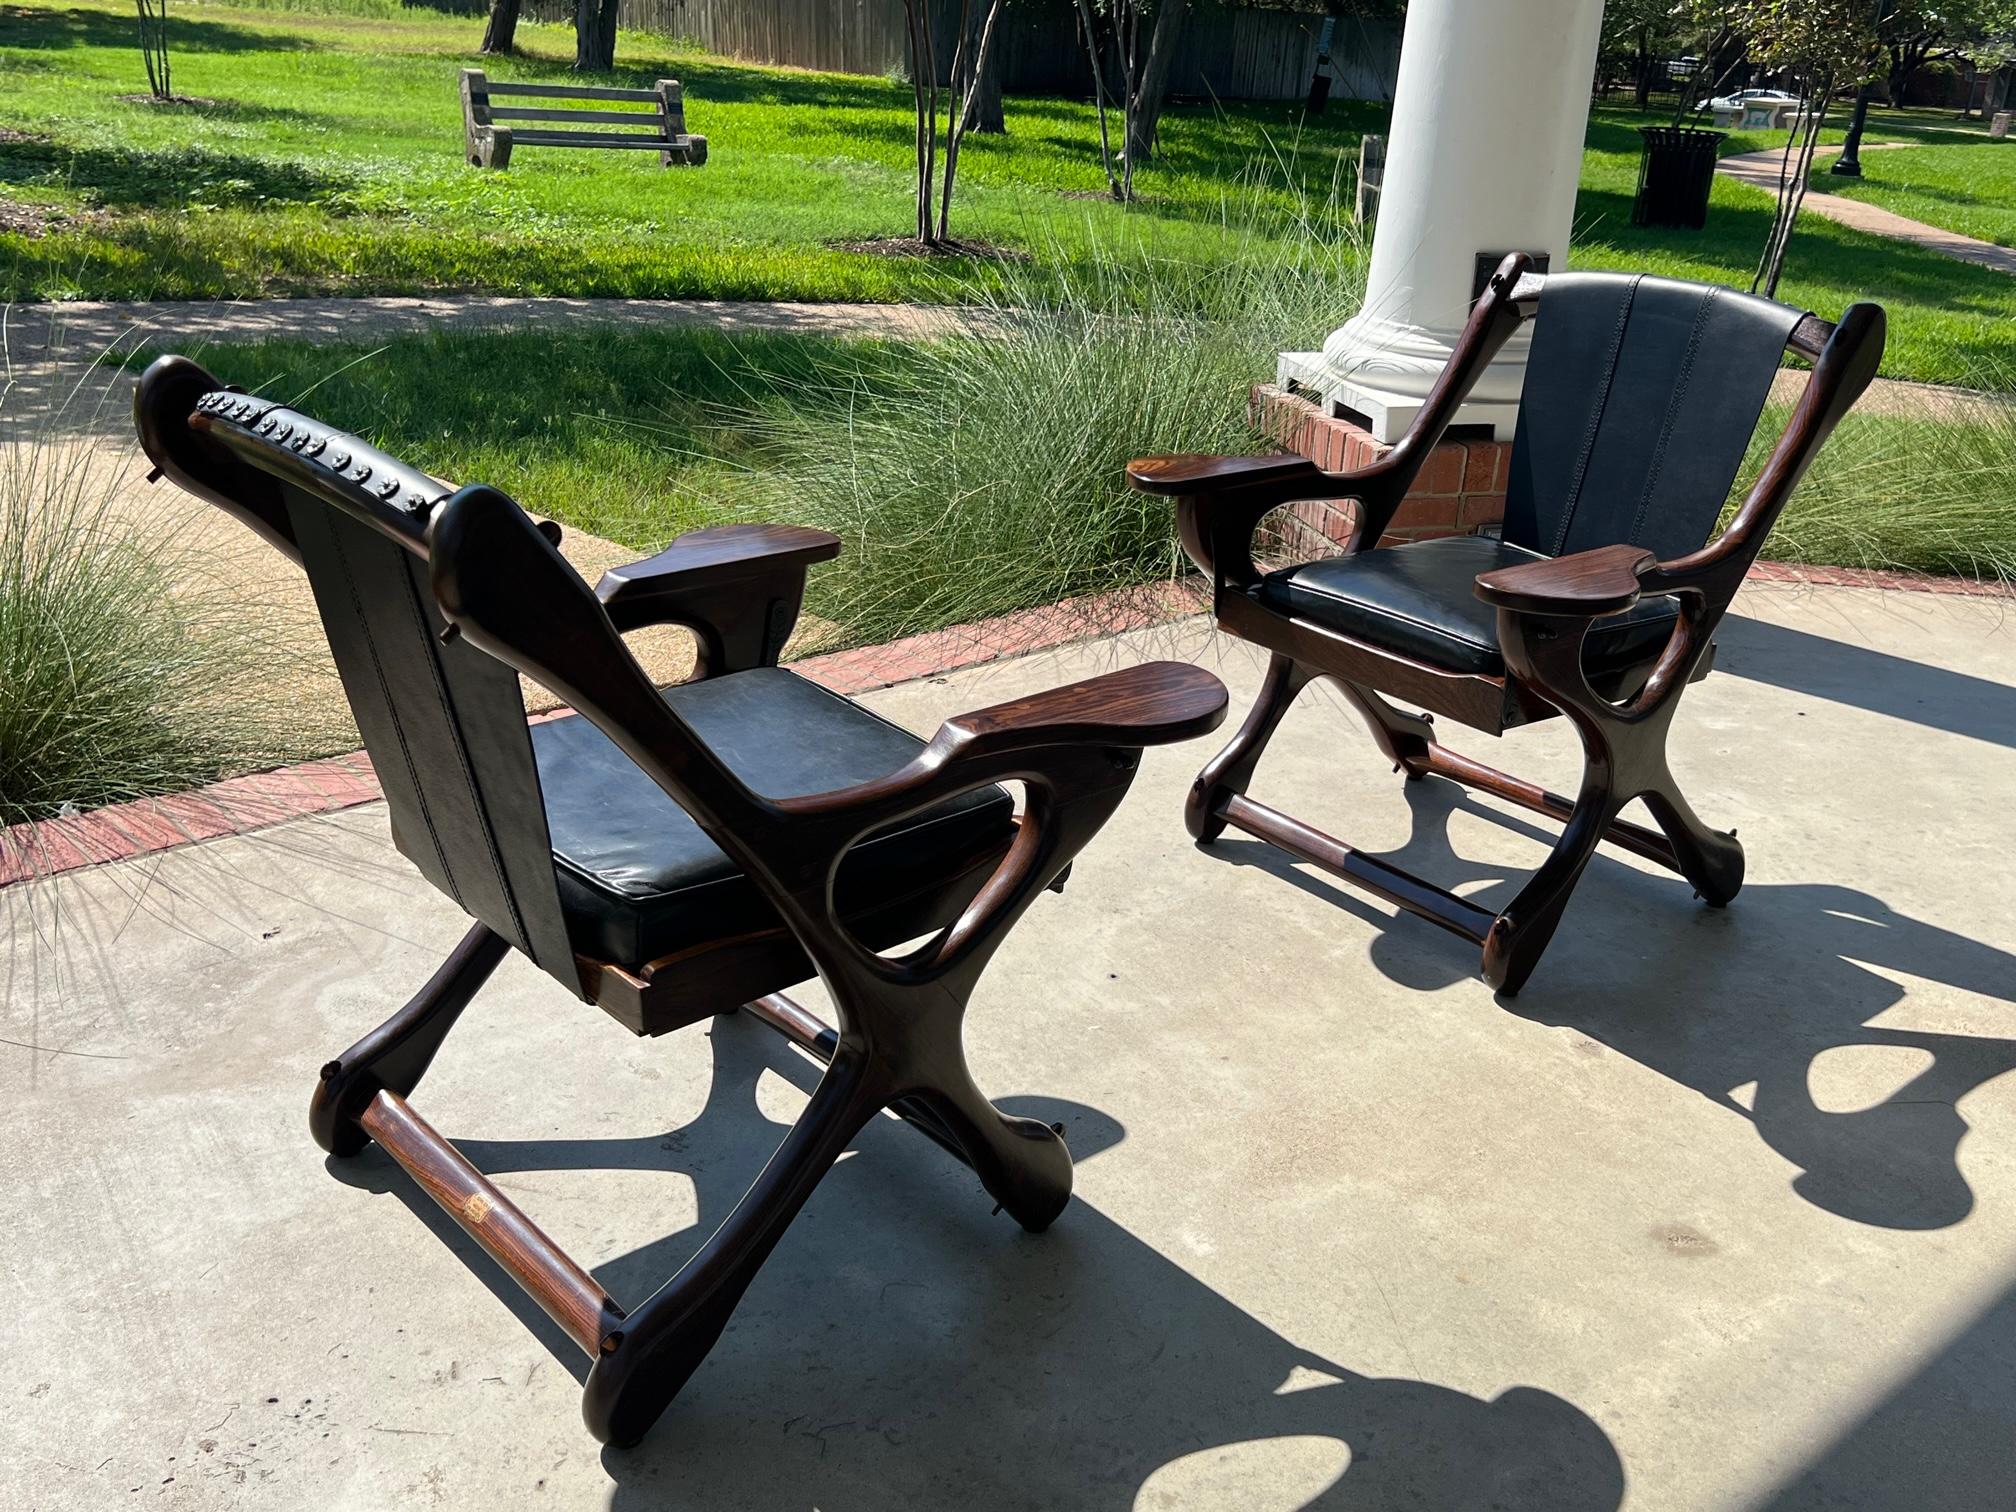 Mid-Century Mexican Modern Don Shoemaker Senal SA Sling Swinger Chairs Set of 4 For Sale 2